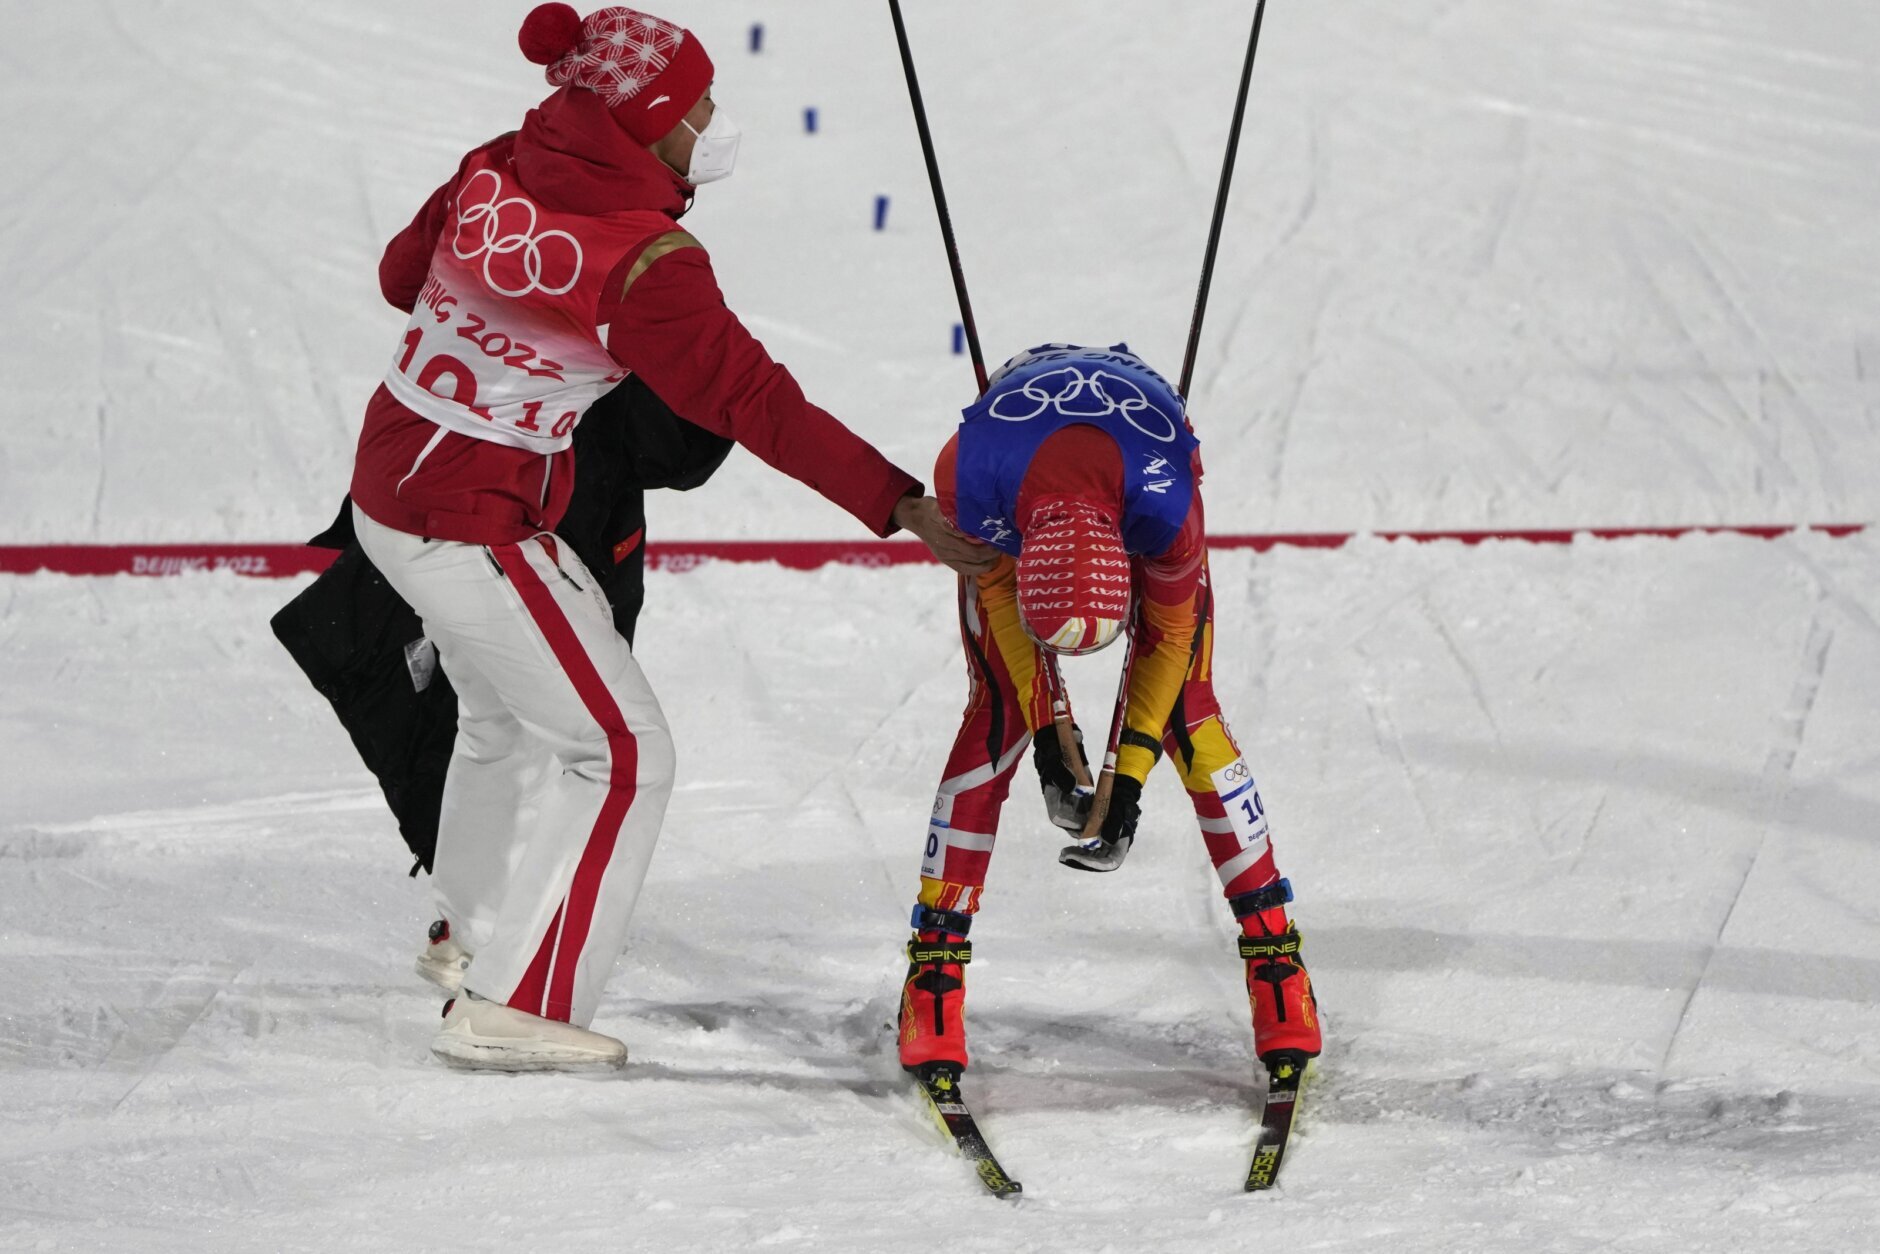 China's Zhao Jiawen, left, greets China's Fan Haibin at the finish line after the cross-country skiing competition of the team Gundersen large hill/4x5km at the 2022 Winter Olympics, Thursday, Feb. 17, 2022, in Zhangjiakou, China. (AP Photo/Alessandra Tarantino)